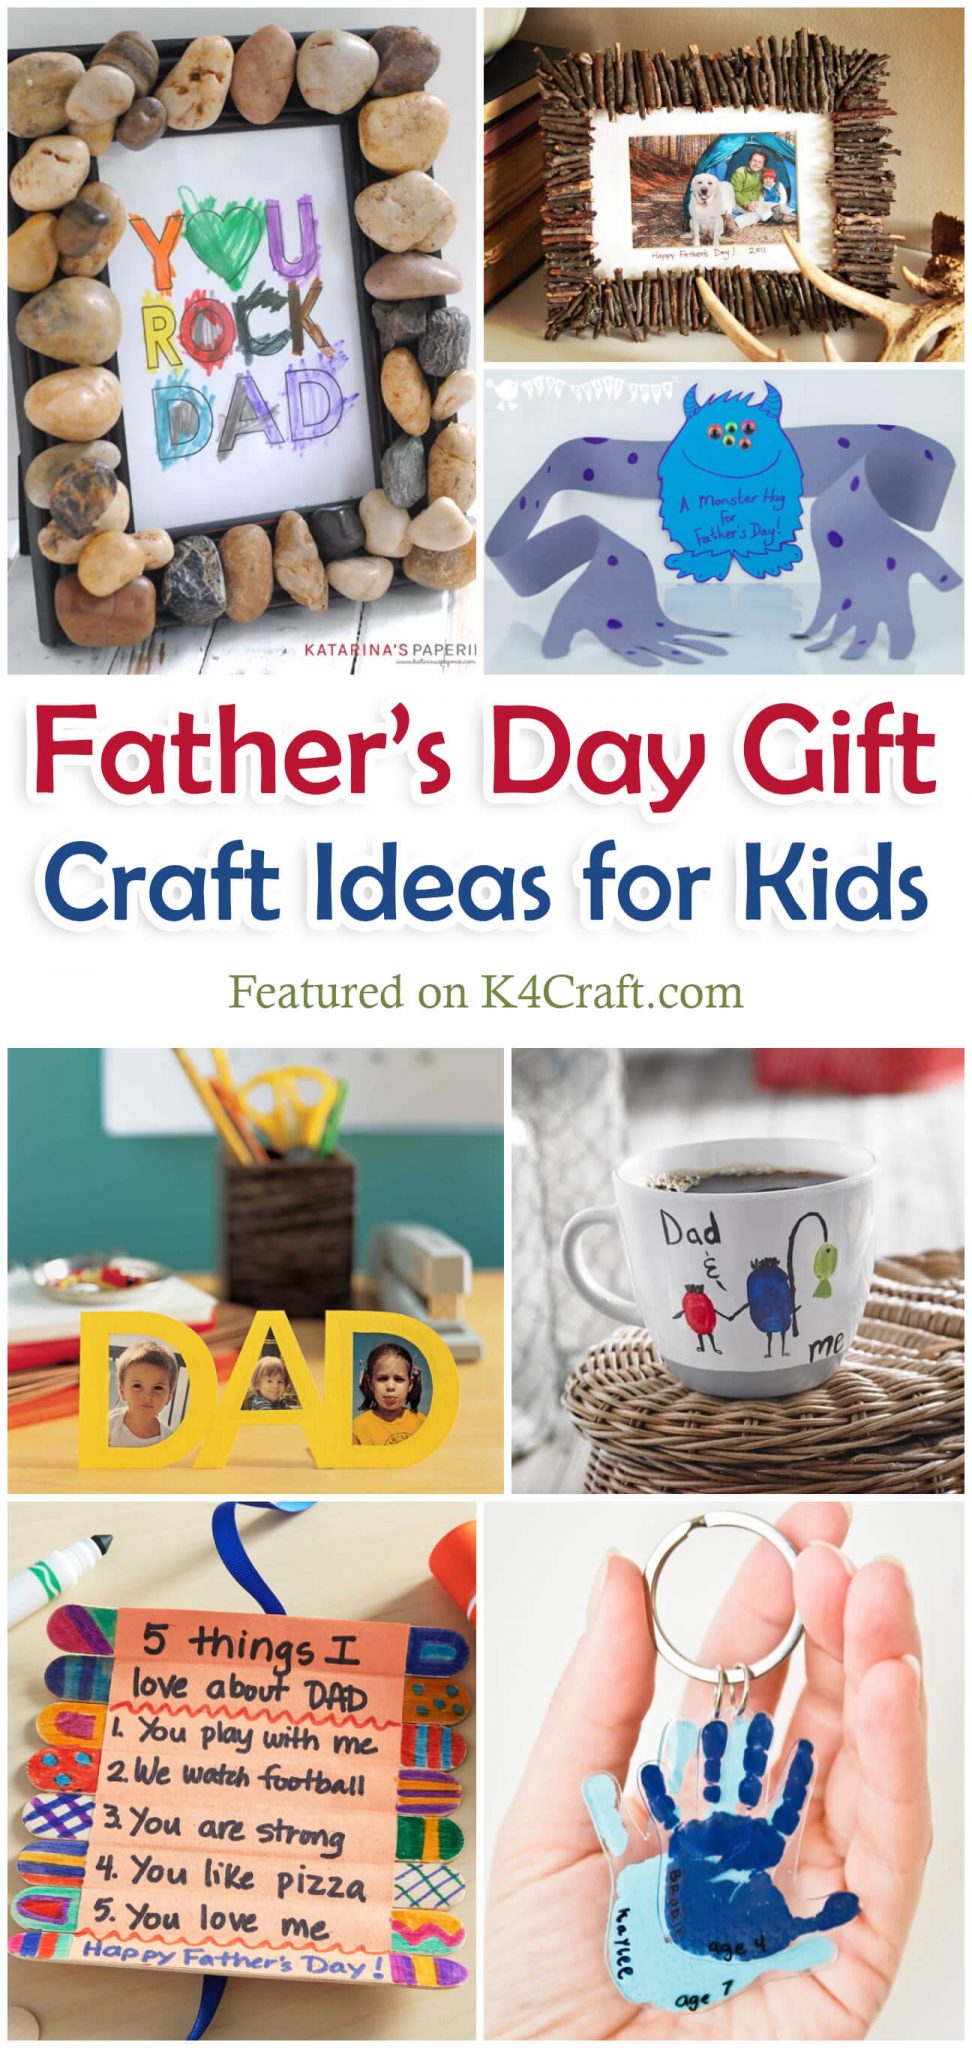 Best Father's Day Gifts to Express Your Appreciation